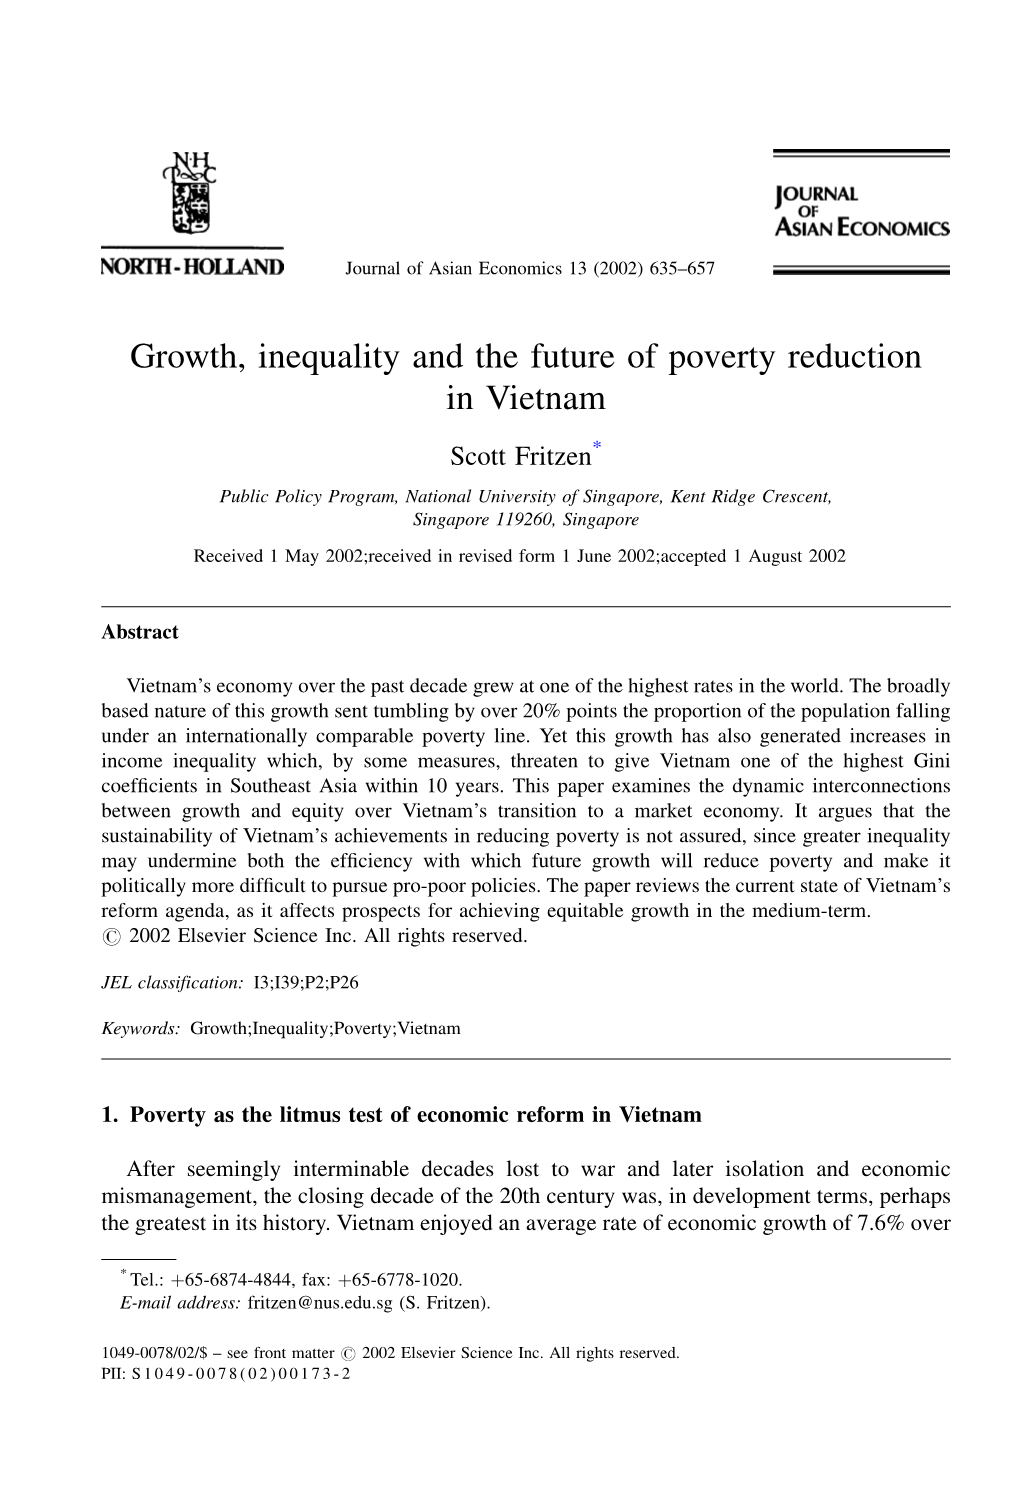 Growth, Inequality and the Future of Poverty Reduction in Vietnam